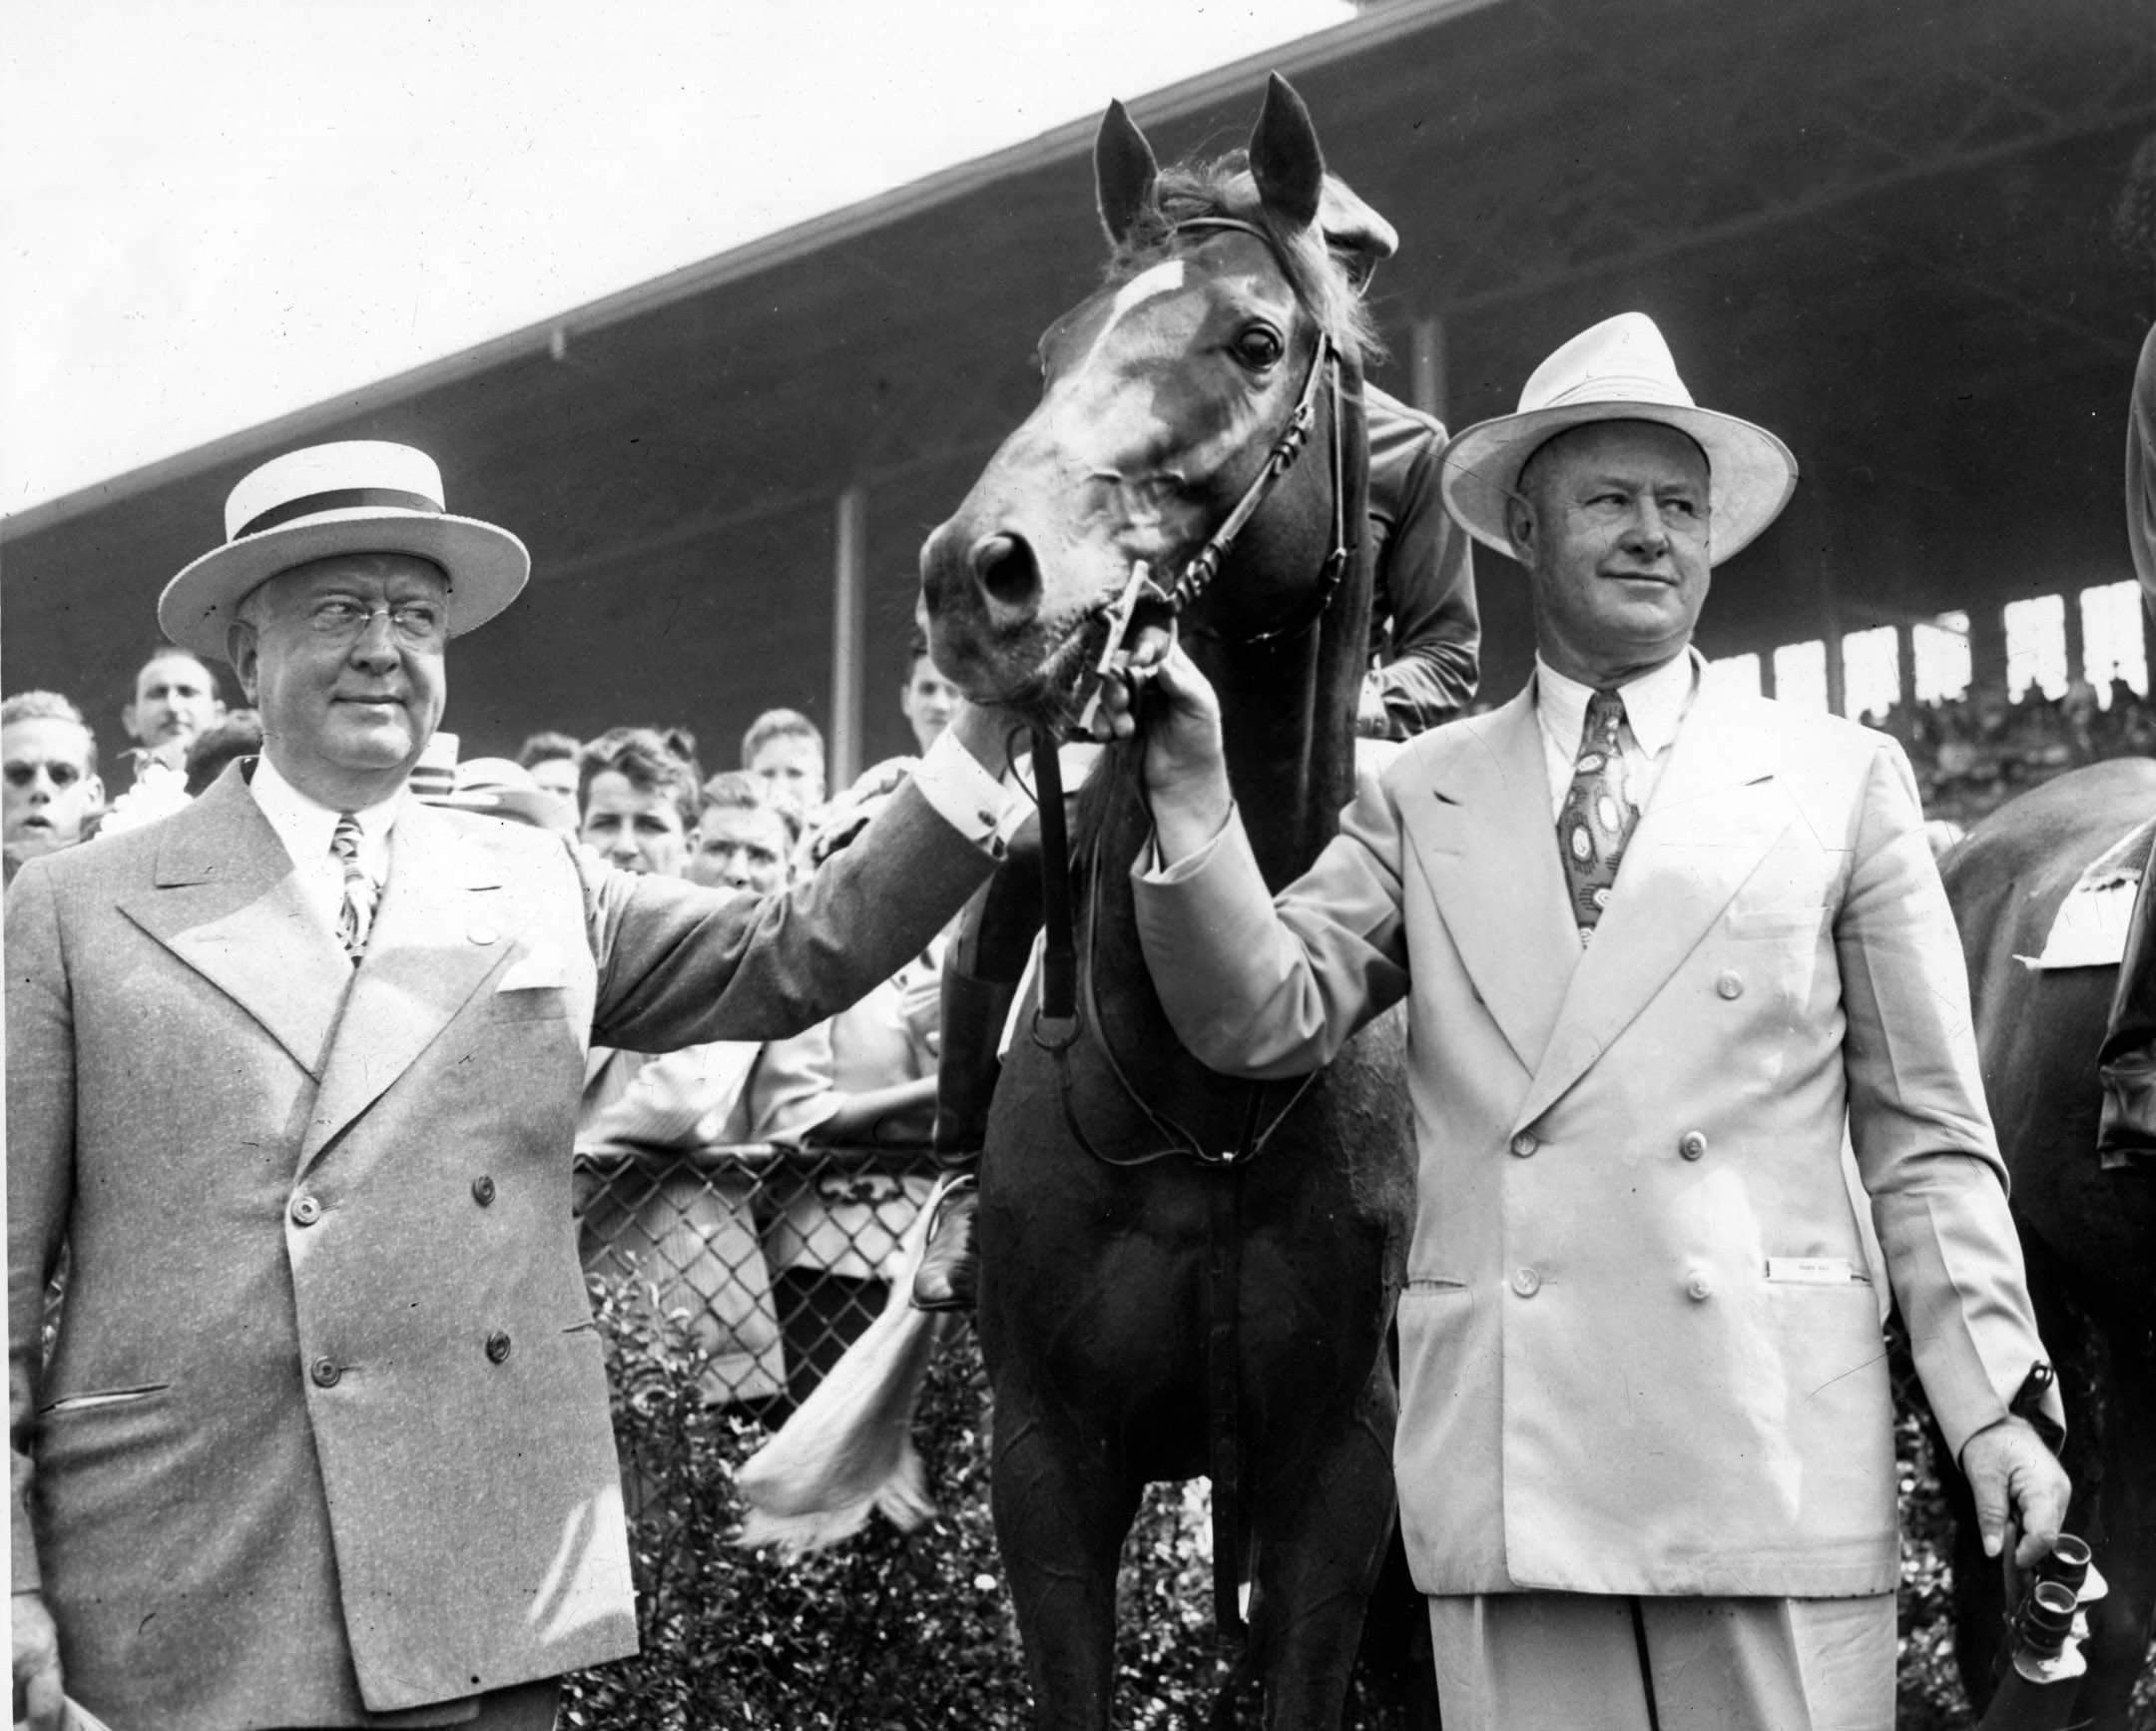 Ben Jones and Warren Wright holding Whirlaway after his last race on July 5, 1943 at Arlington Park (Washington Park Photo/Museum Collection)